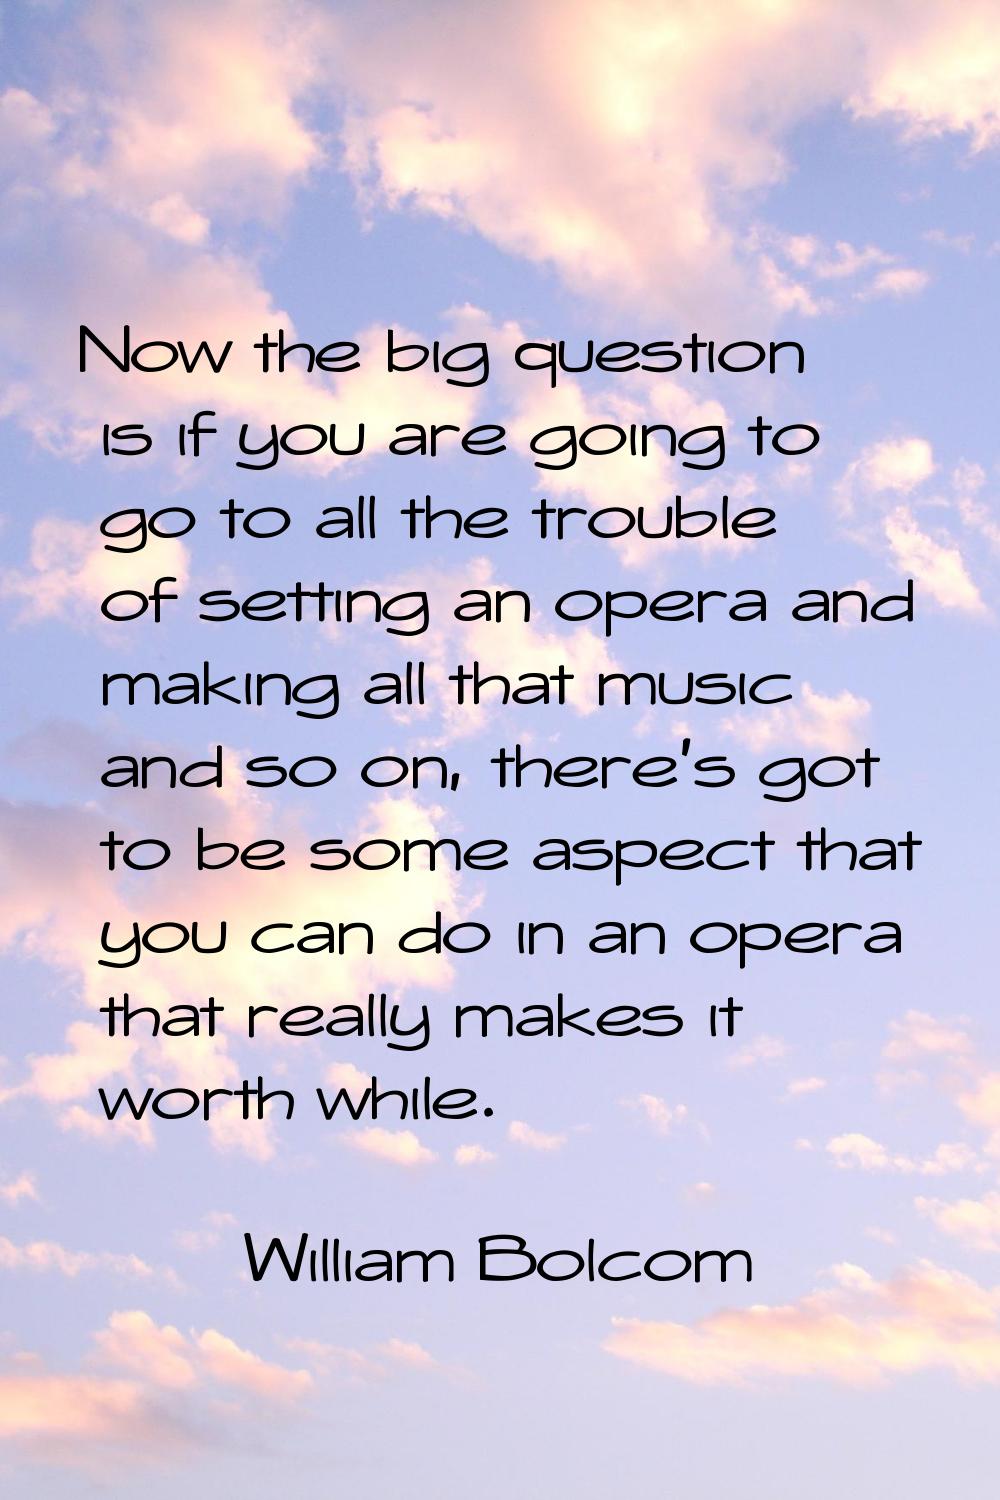 Now the big question is if you are going to go to all the trouble of setting an opera and making al